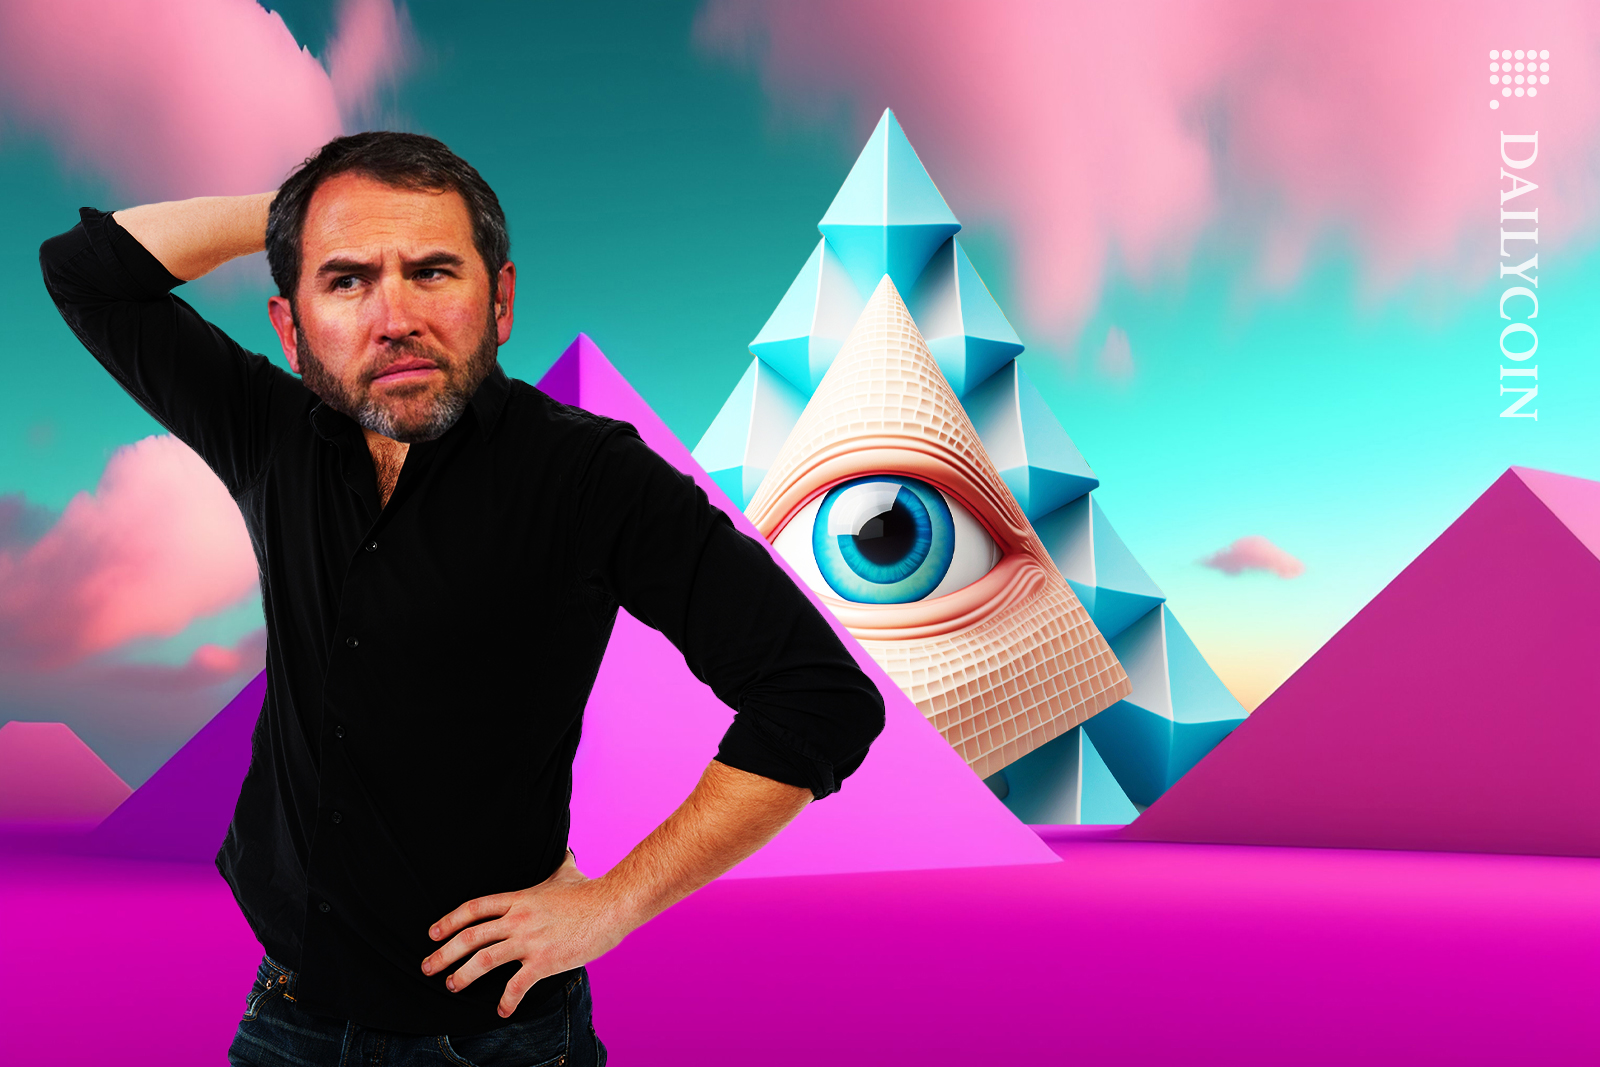 Brad Garlinghouse in pyramid town.